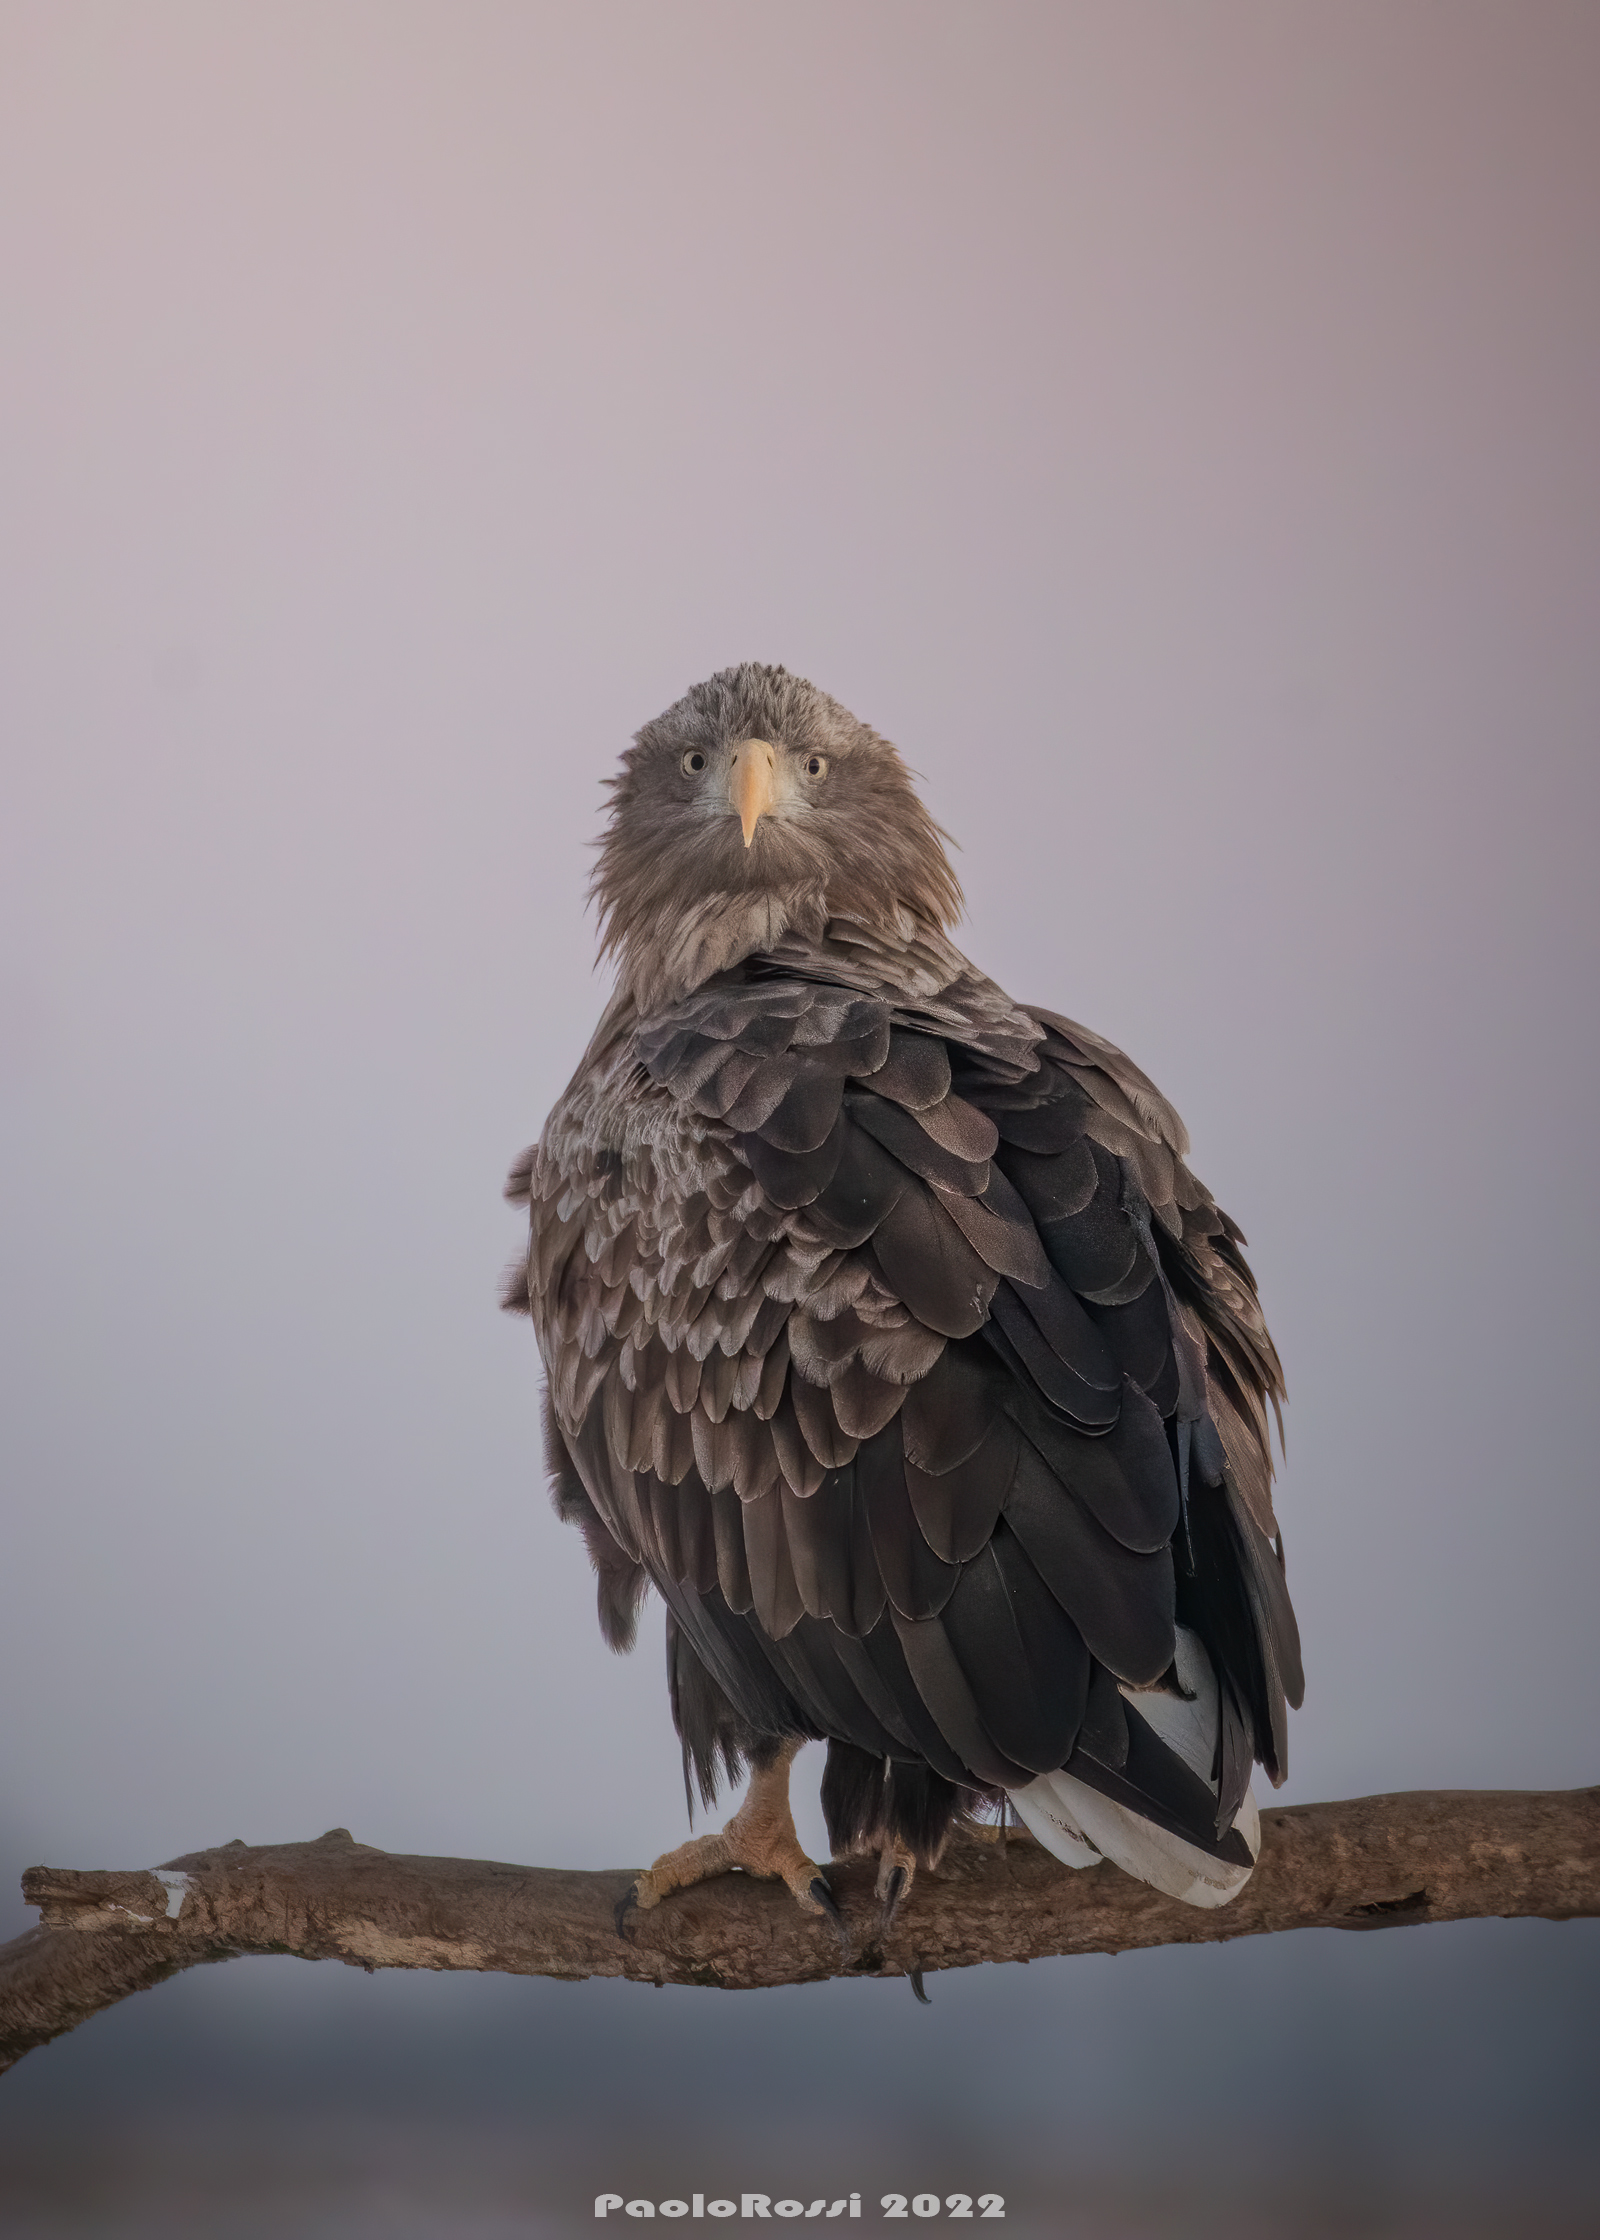 White-tailed eagle at dawn......